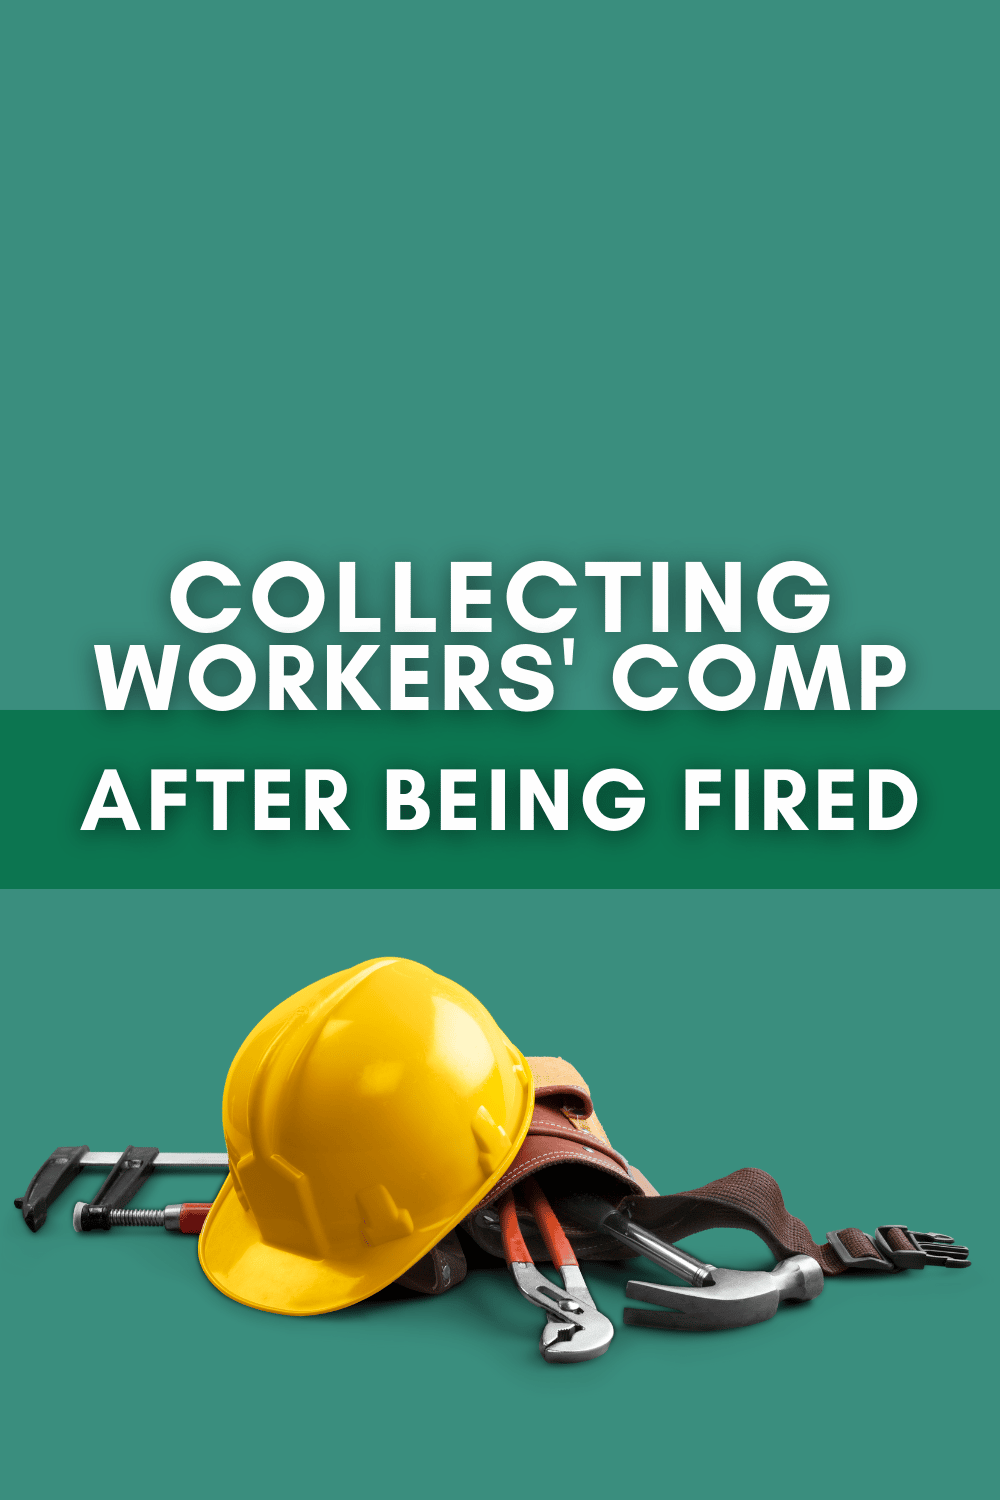 Can You Collect Workers’ Comp After Being Fired?